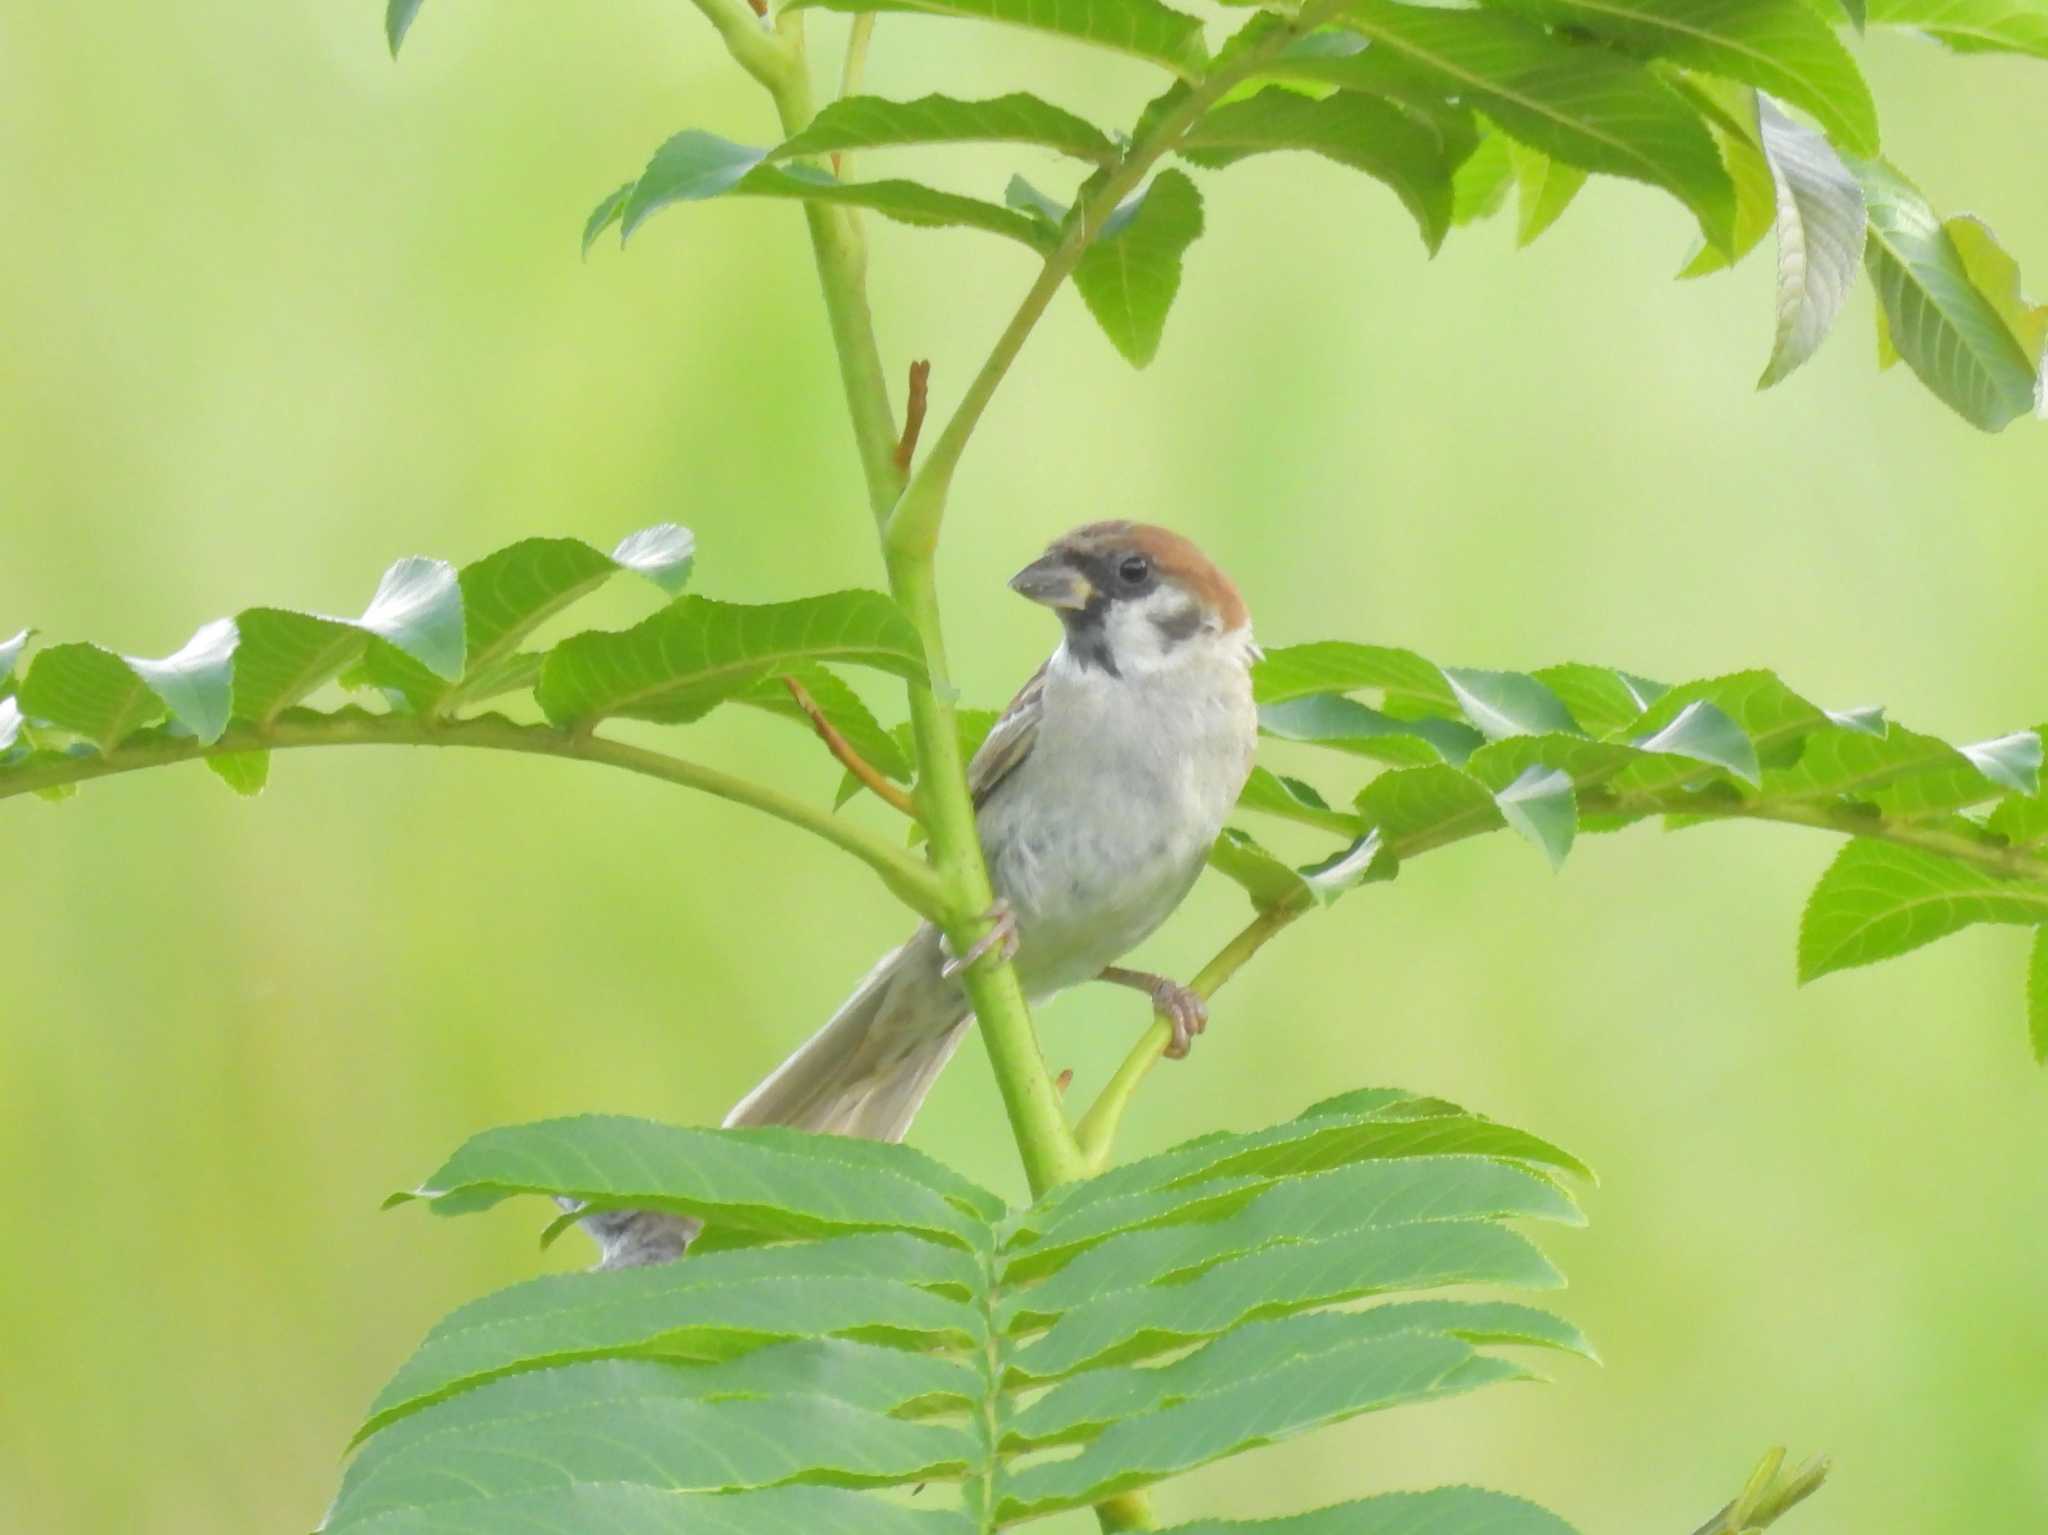 Photo of Eurasian Tree Sparrow at 鴨川 by ゆりかもめ